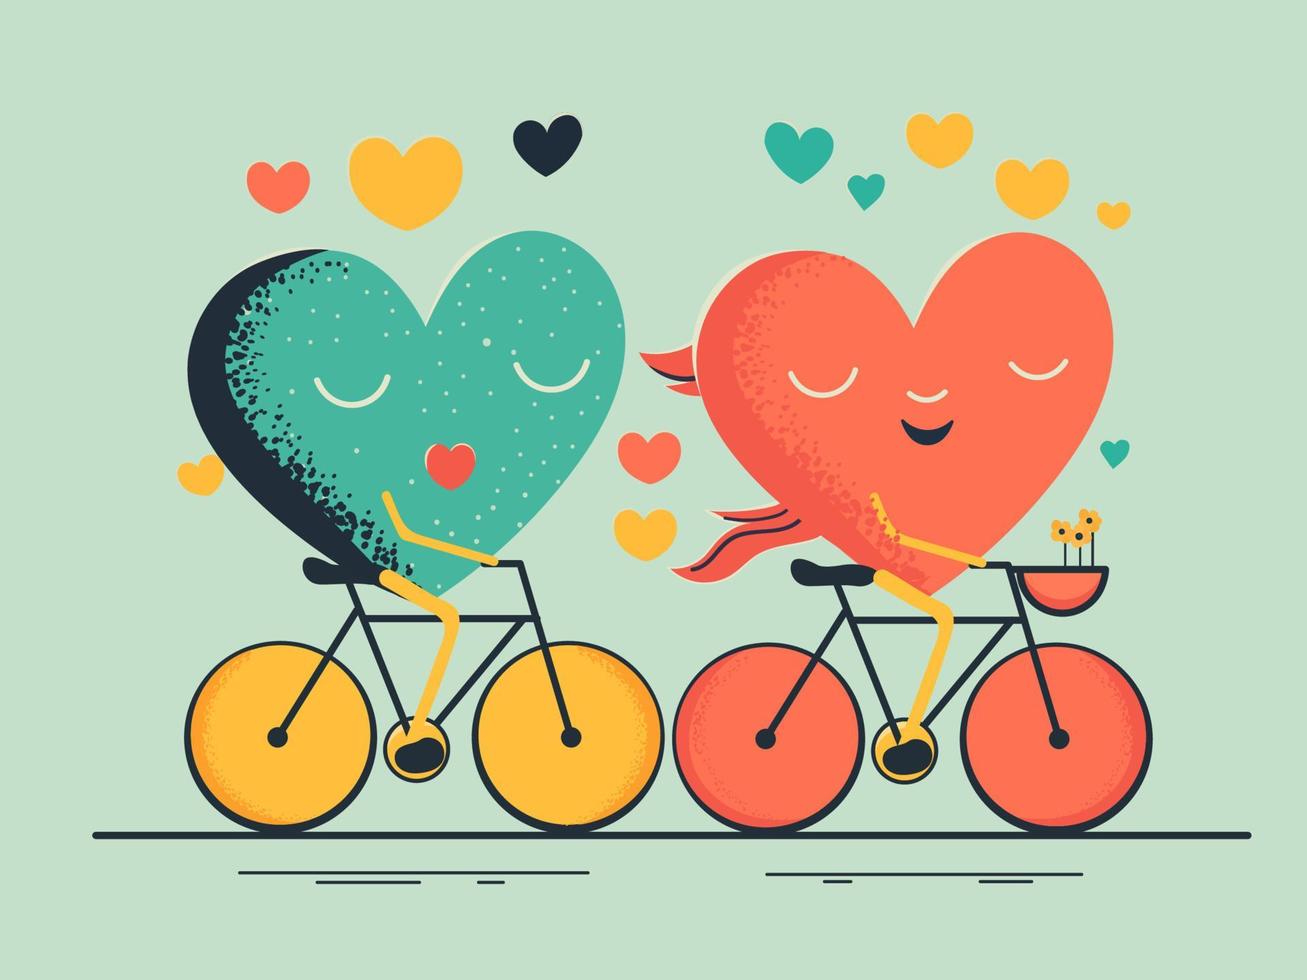 Two Funny Hearts Riding On Their Bicycle For Love Concept. vector